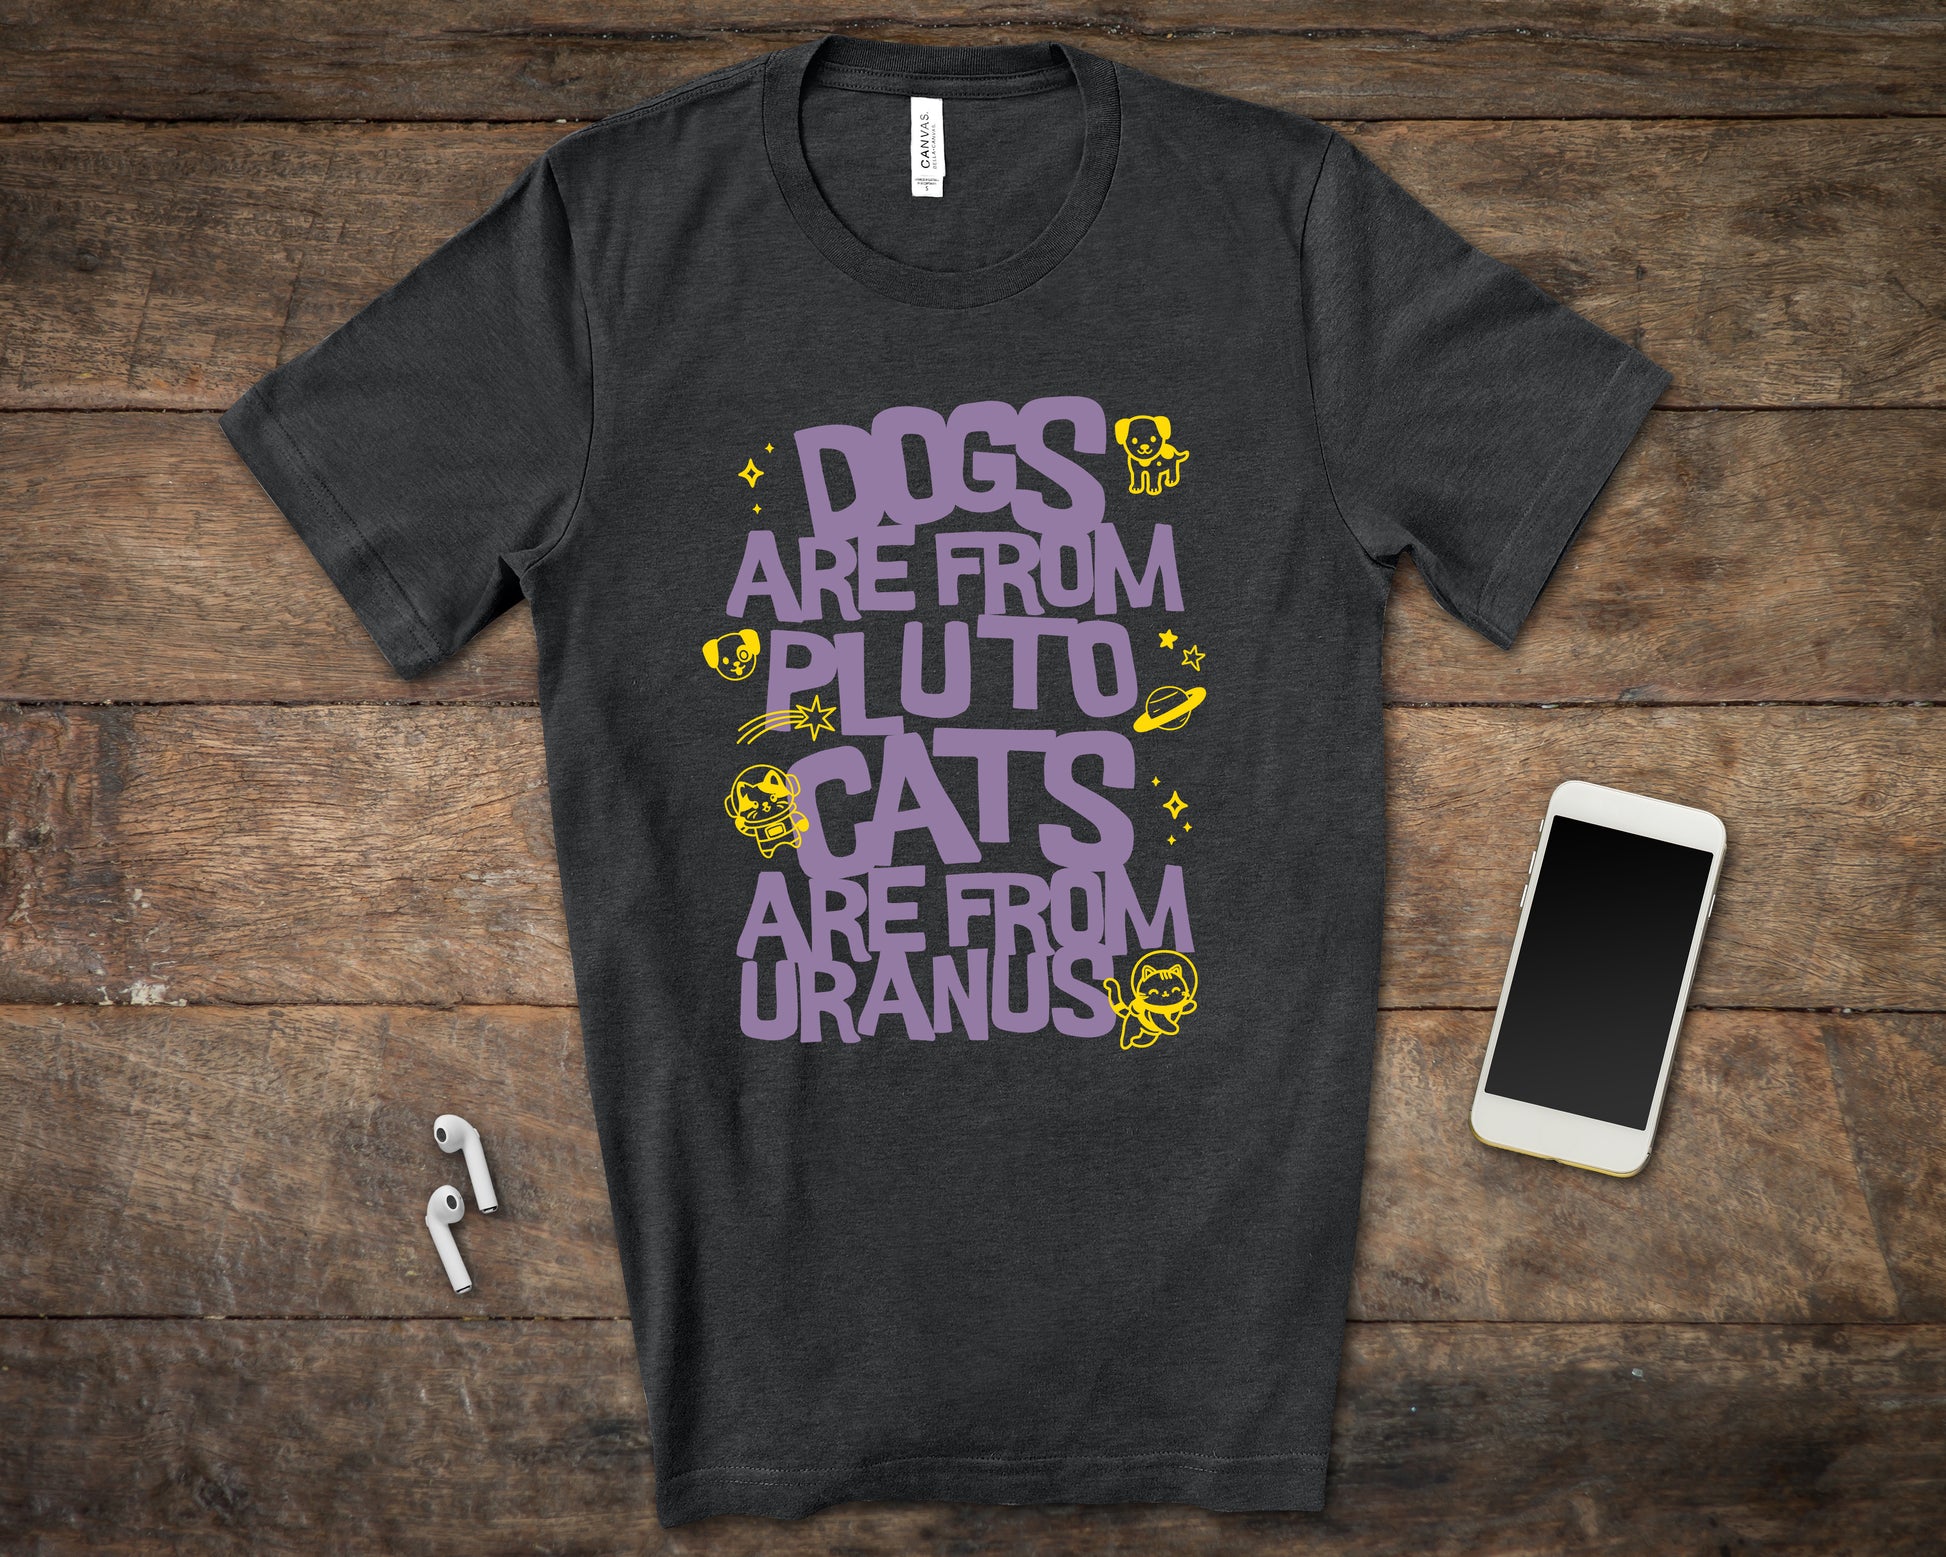 Funny Dog and Cat Tshirt, difference between dogs and cats for dog mom or dog dad-T-Shirts-PureDesignTees